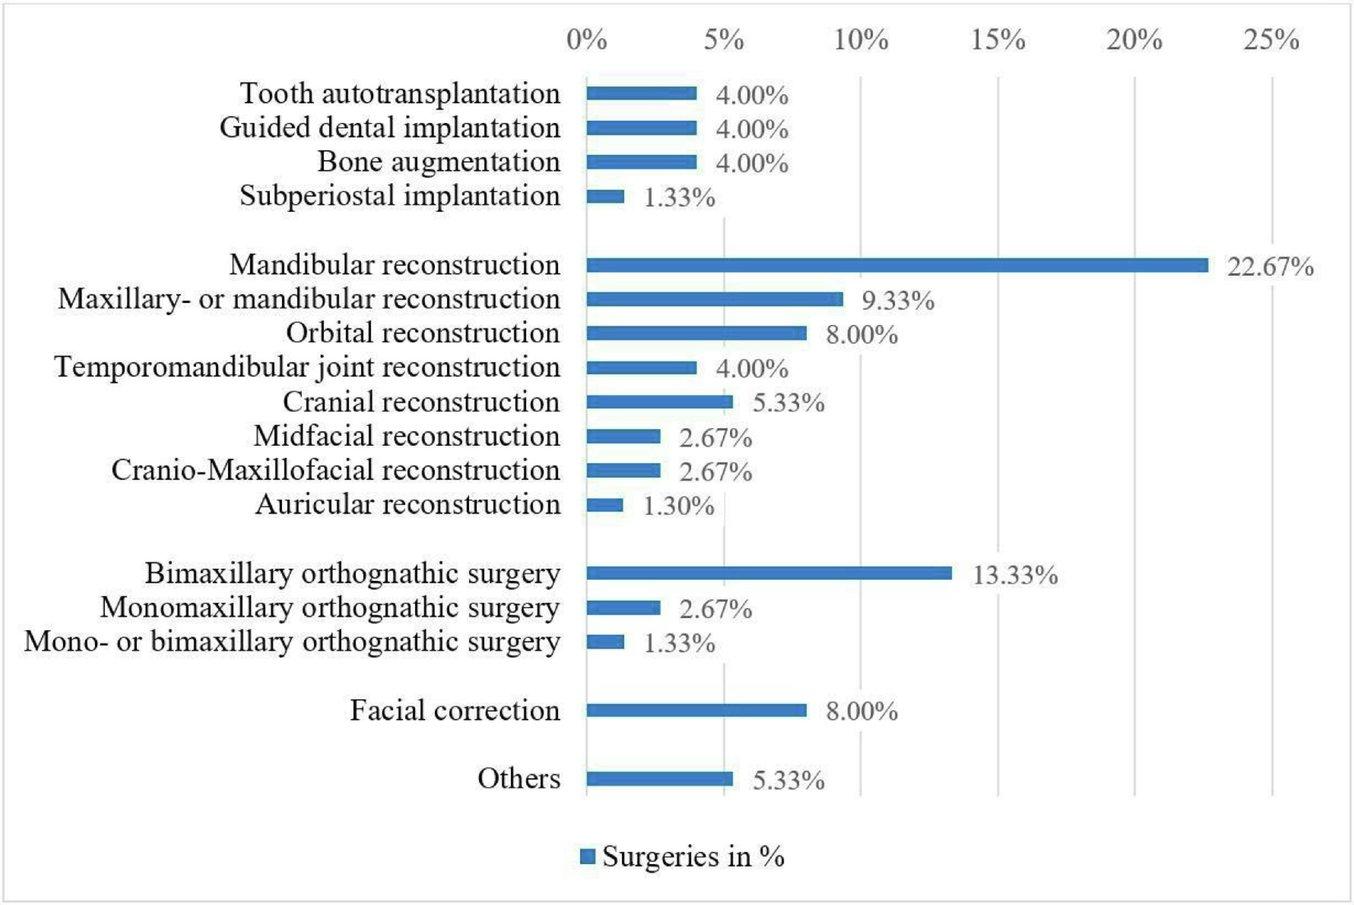 List of performed surgeries with the aid of 3DP, based on systematical review of 75 studies that were published between January 2018 and December 2020. (https://www.sciencedirect.com/science/article/pii/S2666964122000157)